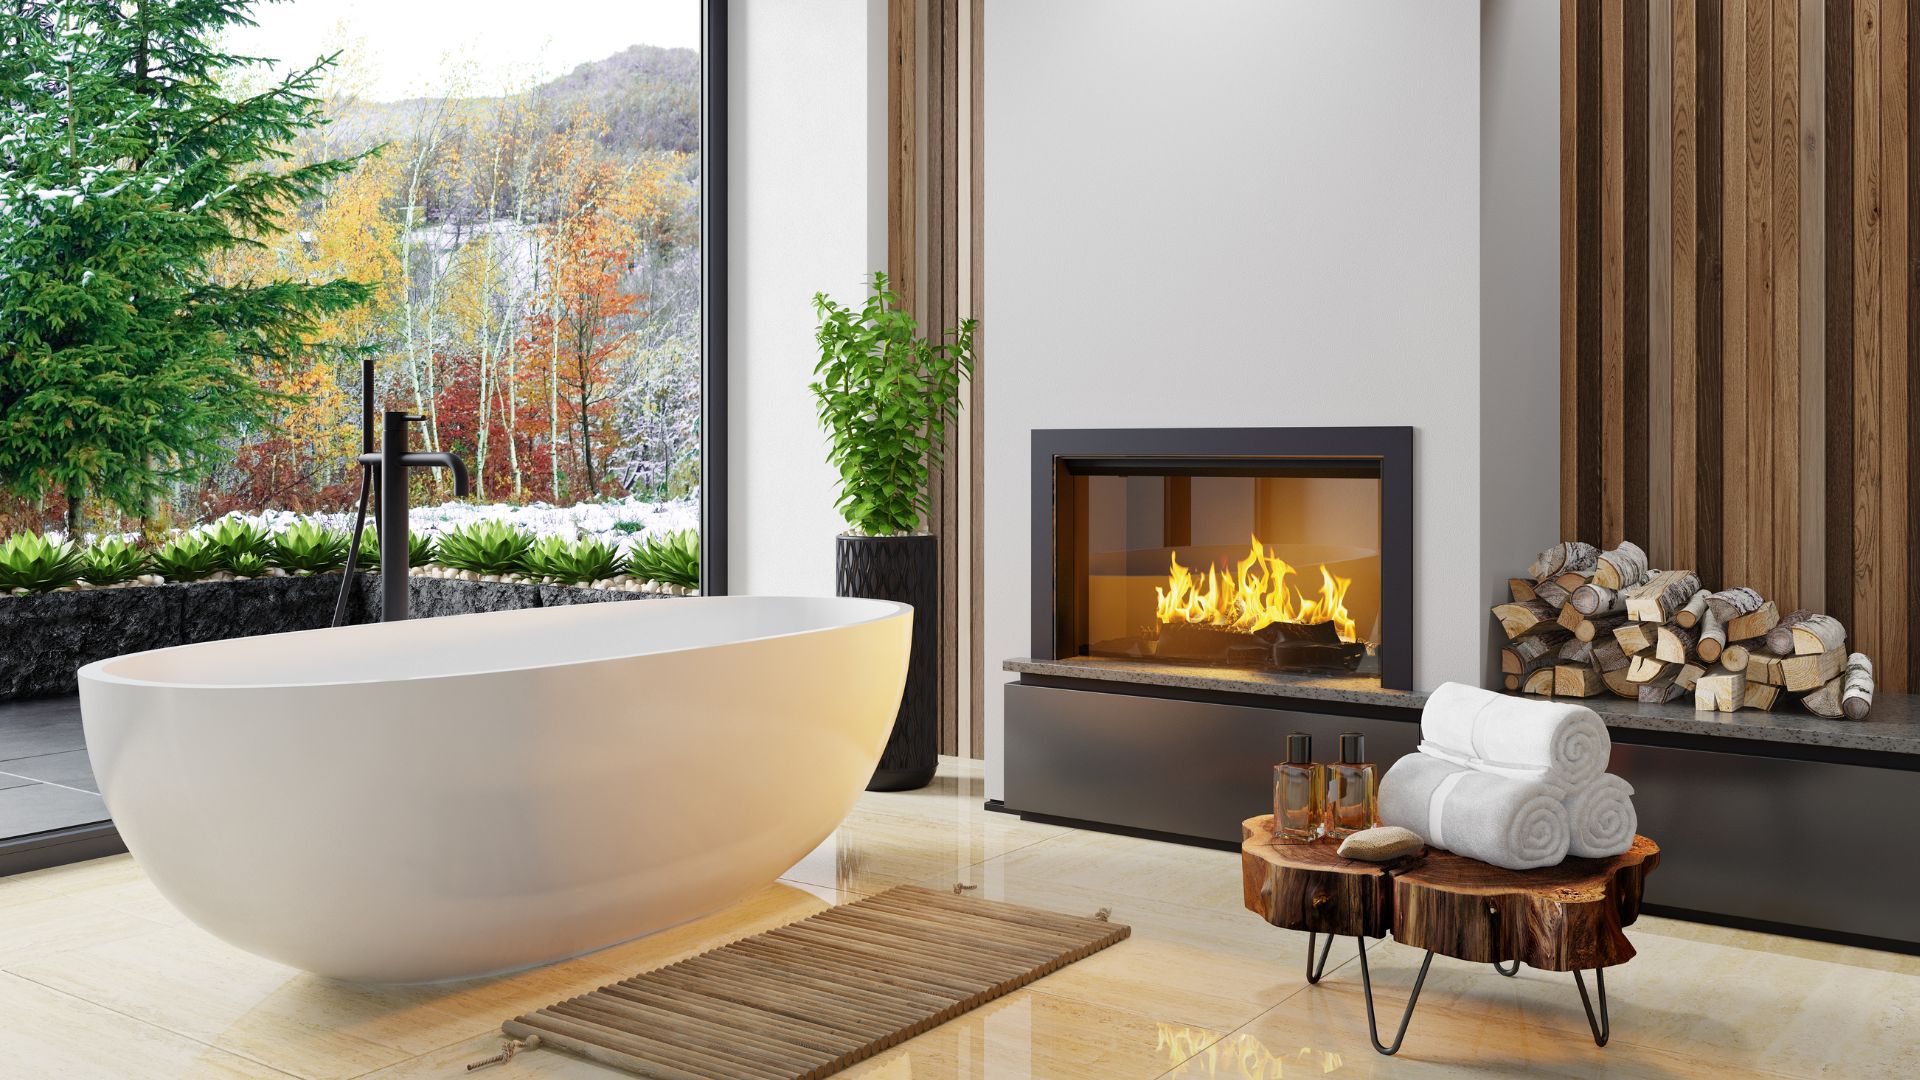 Elegant bathroom with fireplace and tub